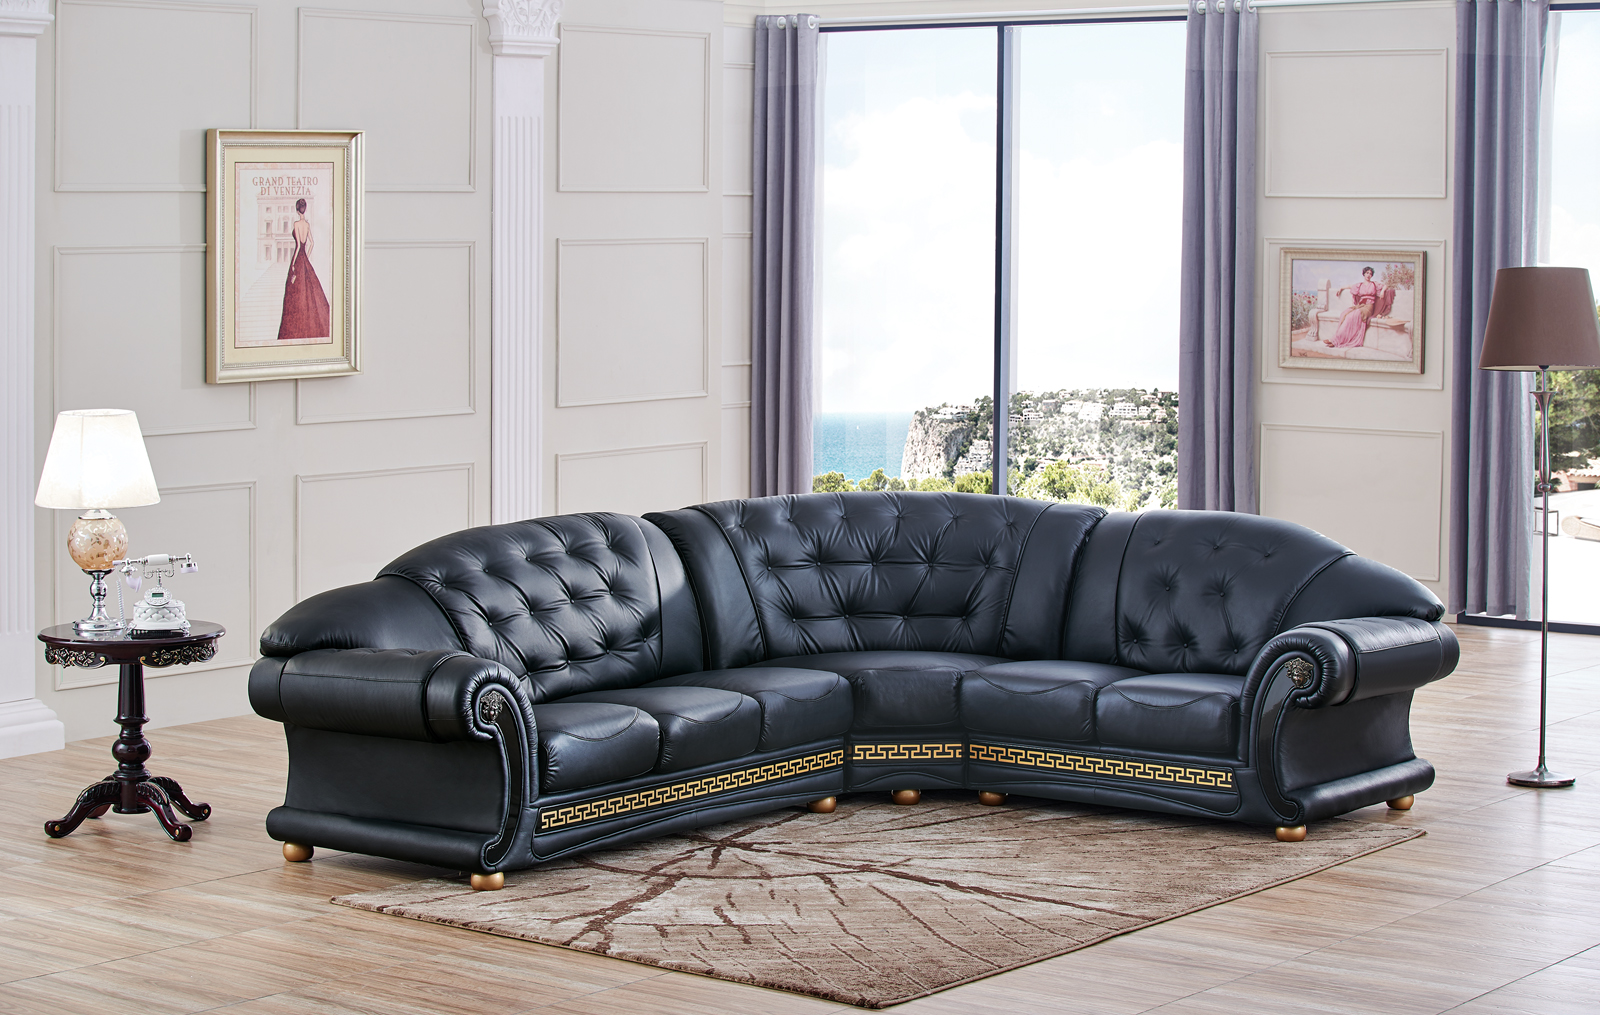 Living Room Furniture Sofas Loveseats and Chairs Apolo Sectional Black